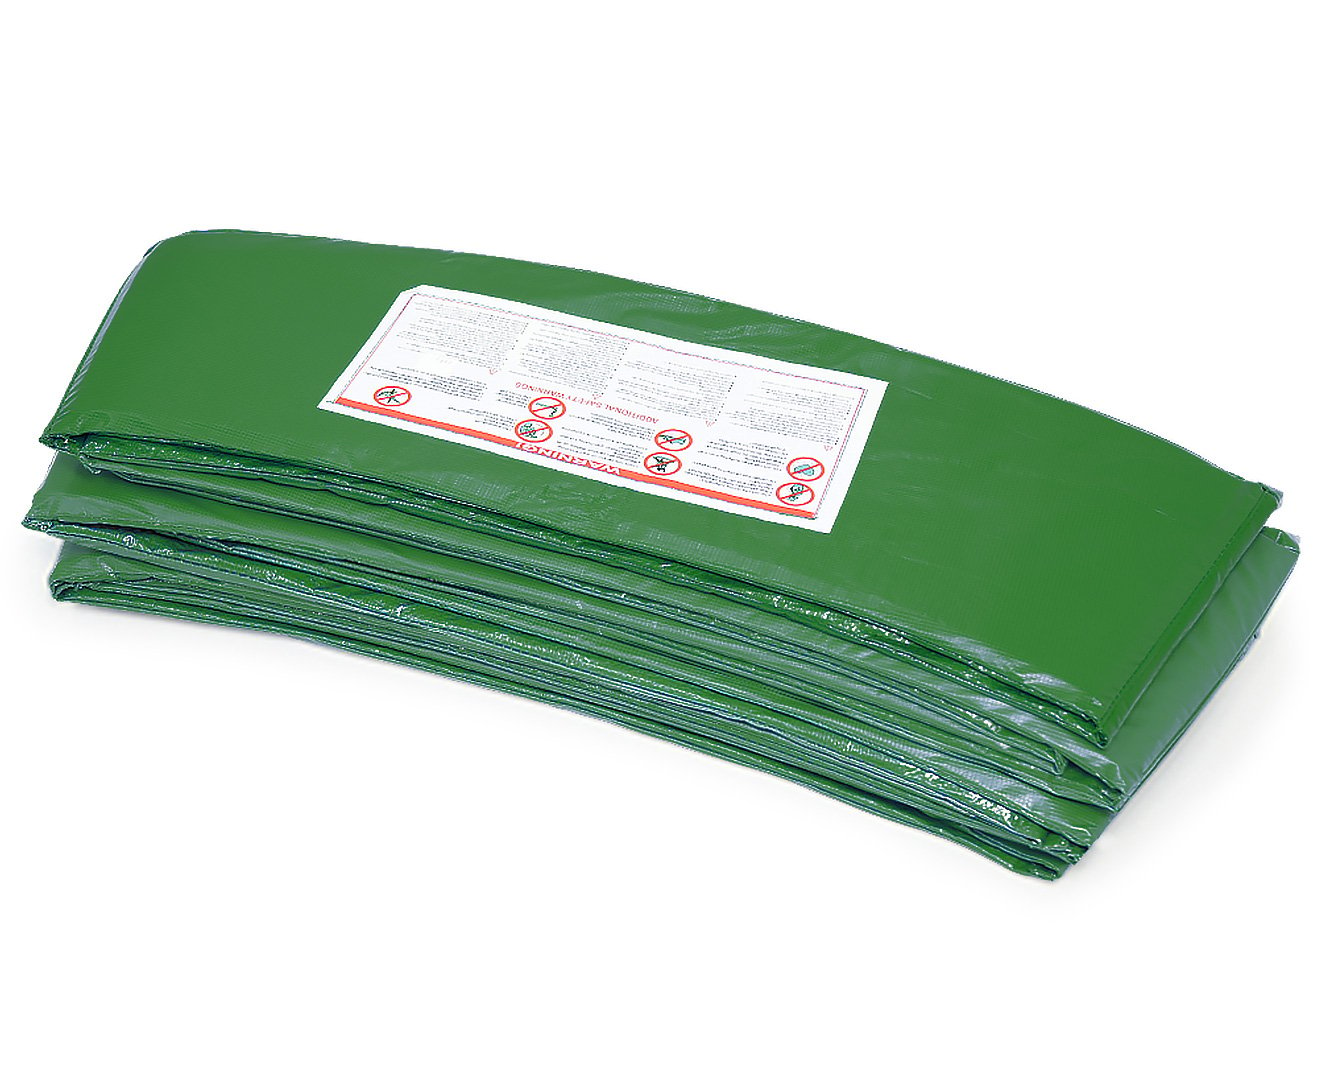 6ft Trampoline Replacement Safety Spring Pad Round Cover Green 1